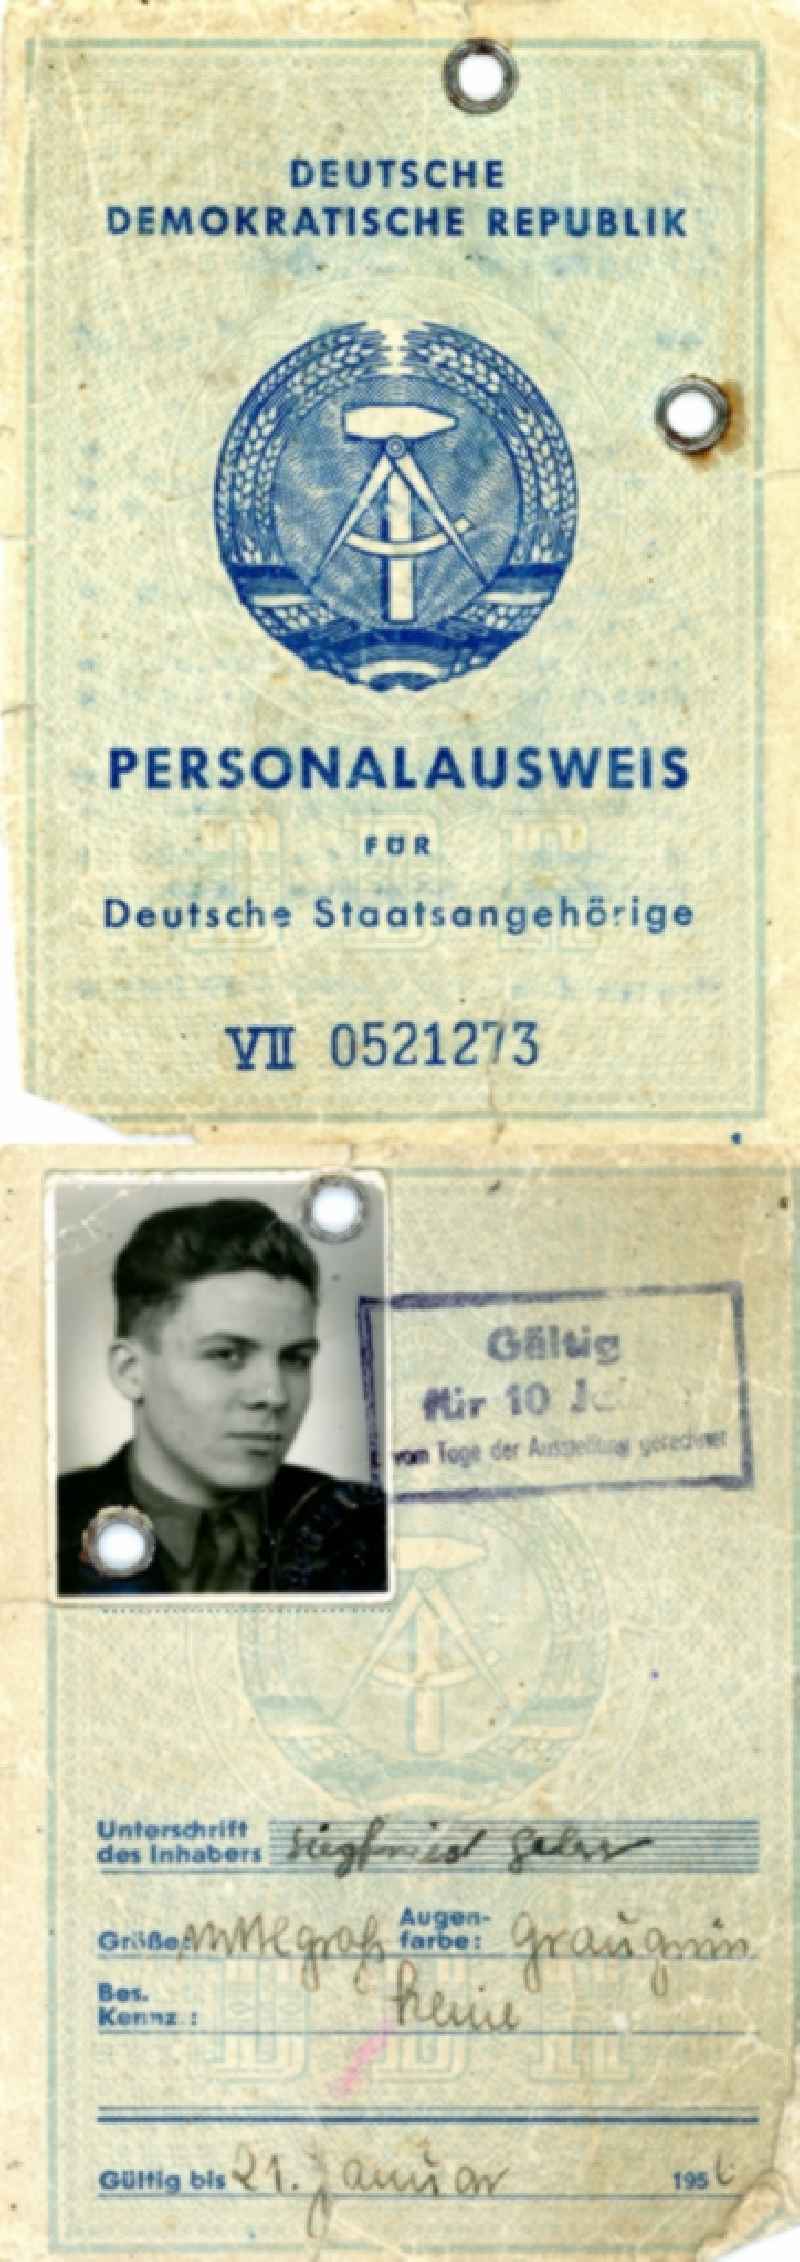 Reproduction Identity card for German citizens issued in Halberstadt in the state Saxony-Anhalt on the territory of the former GDR, German Democratic Republic